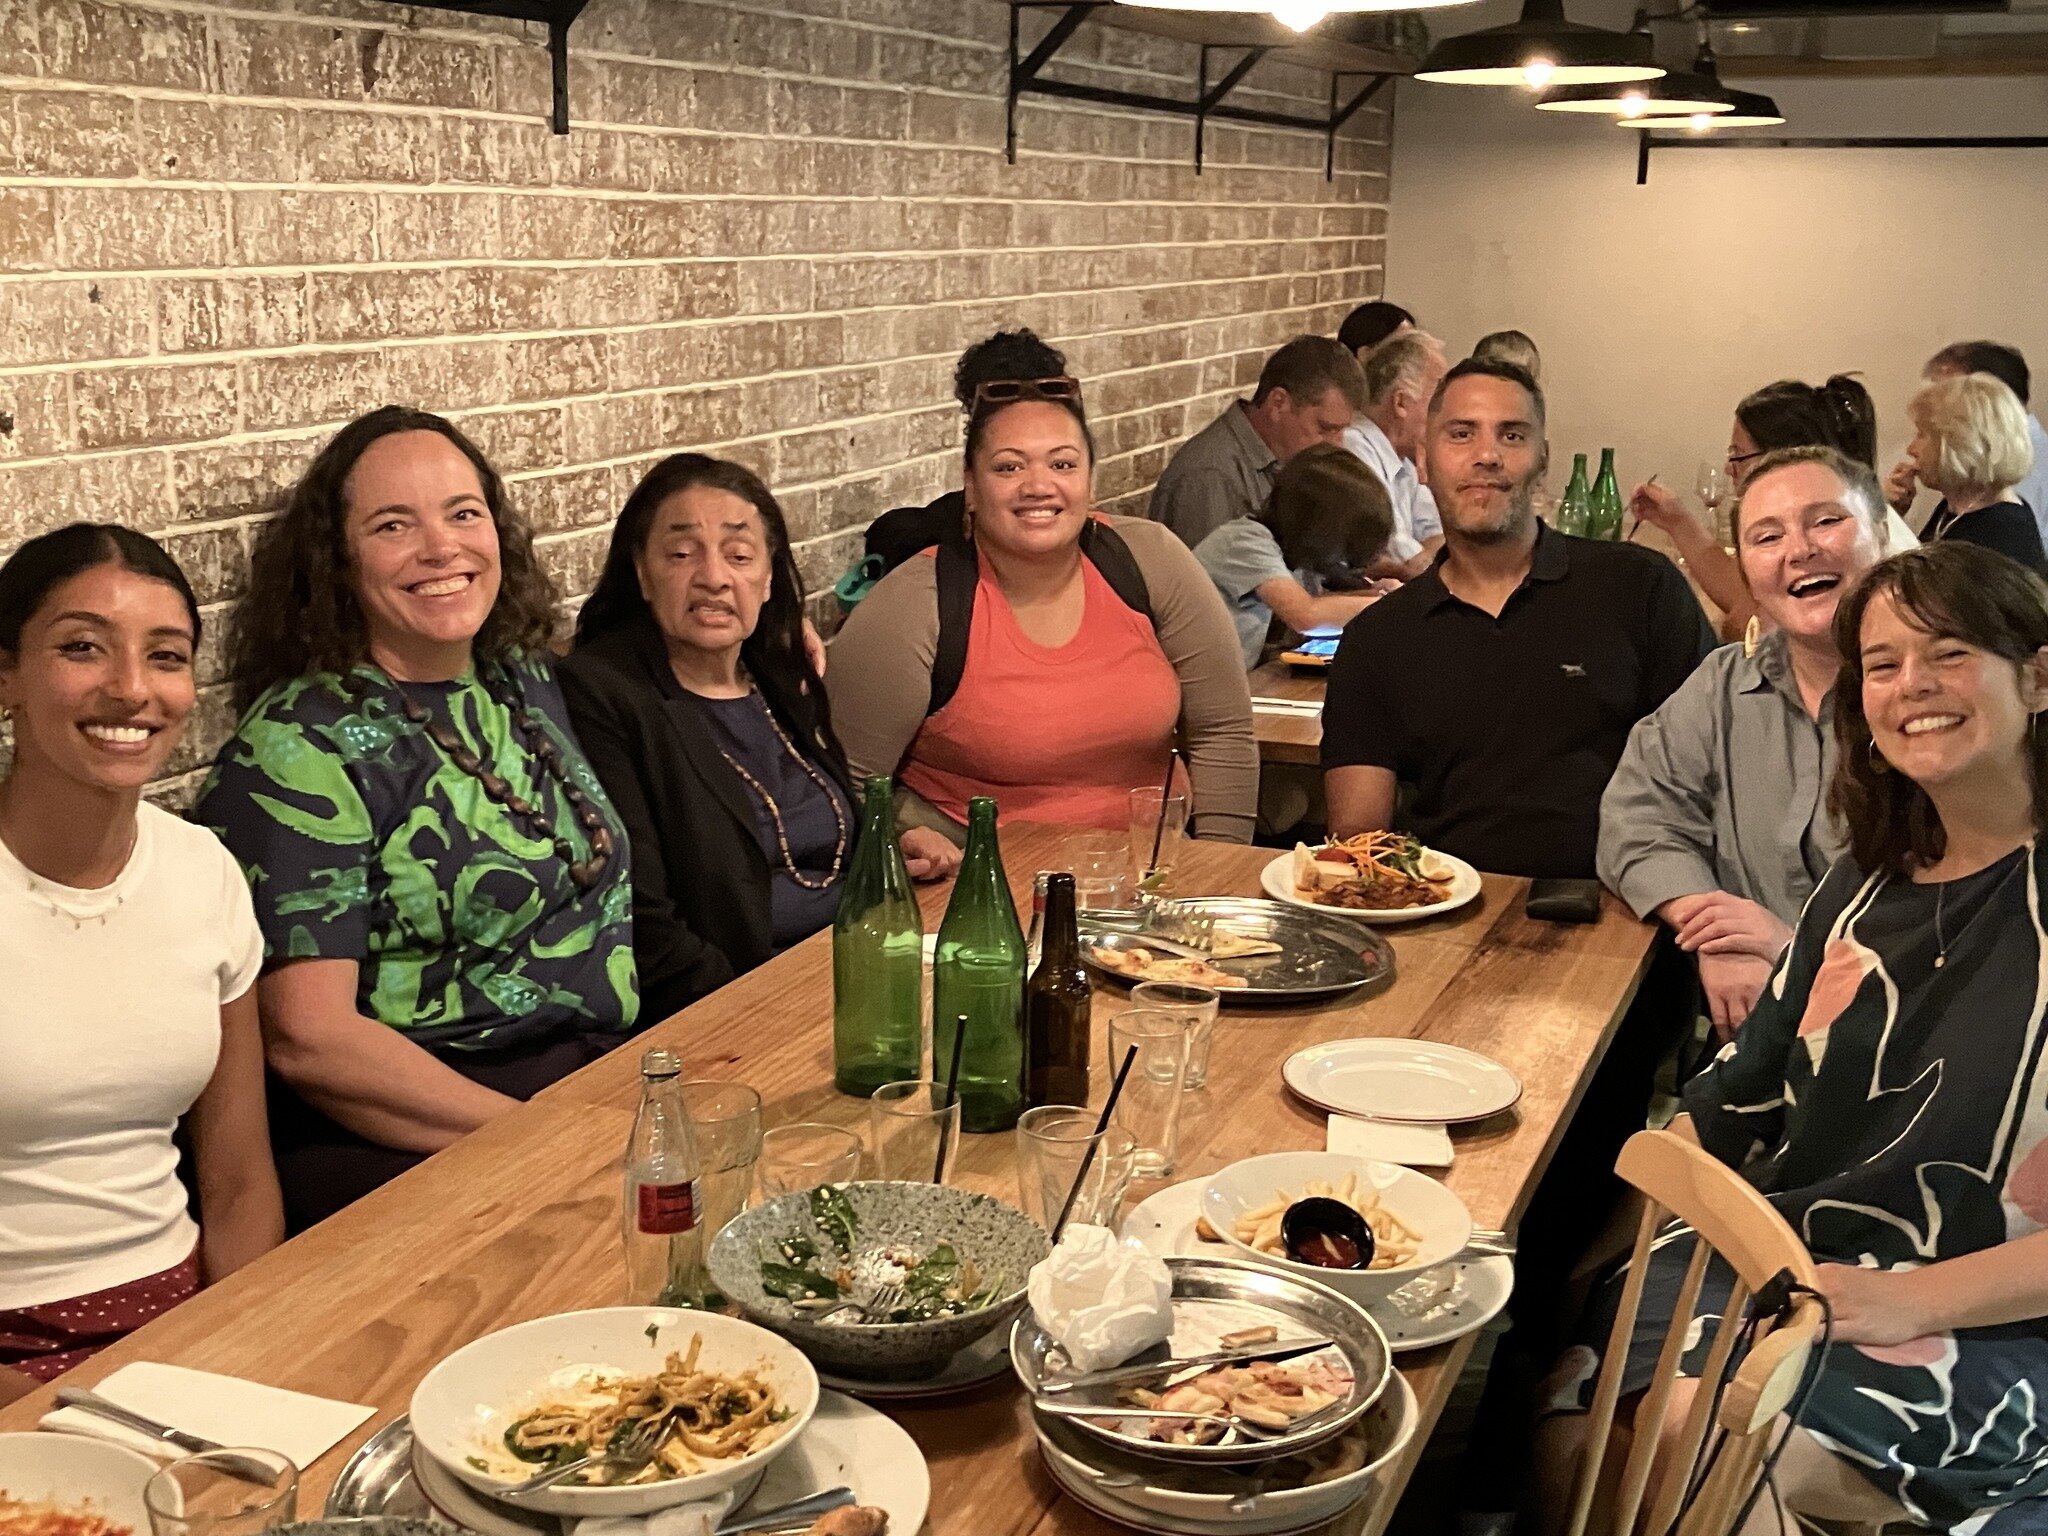 The Atlantic Fellows for Social Equity is a cohort based, collaborative fellowship where nurturing relationships is key. We were thrilled to host our first regional dinner for Senior Fellows last night in Naarm. Fellows from across three different co